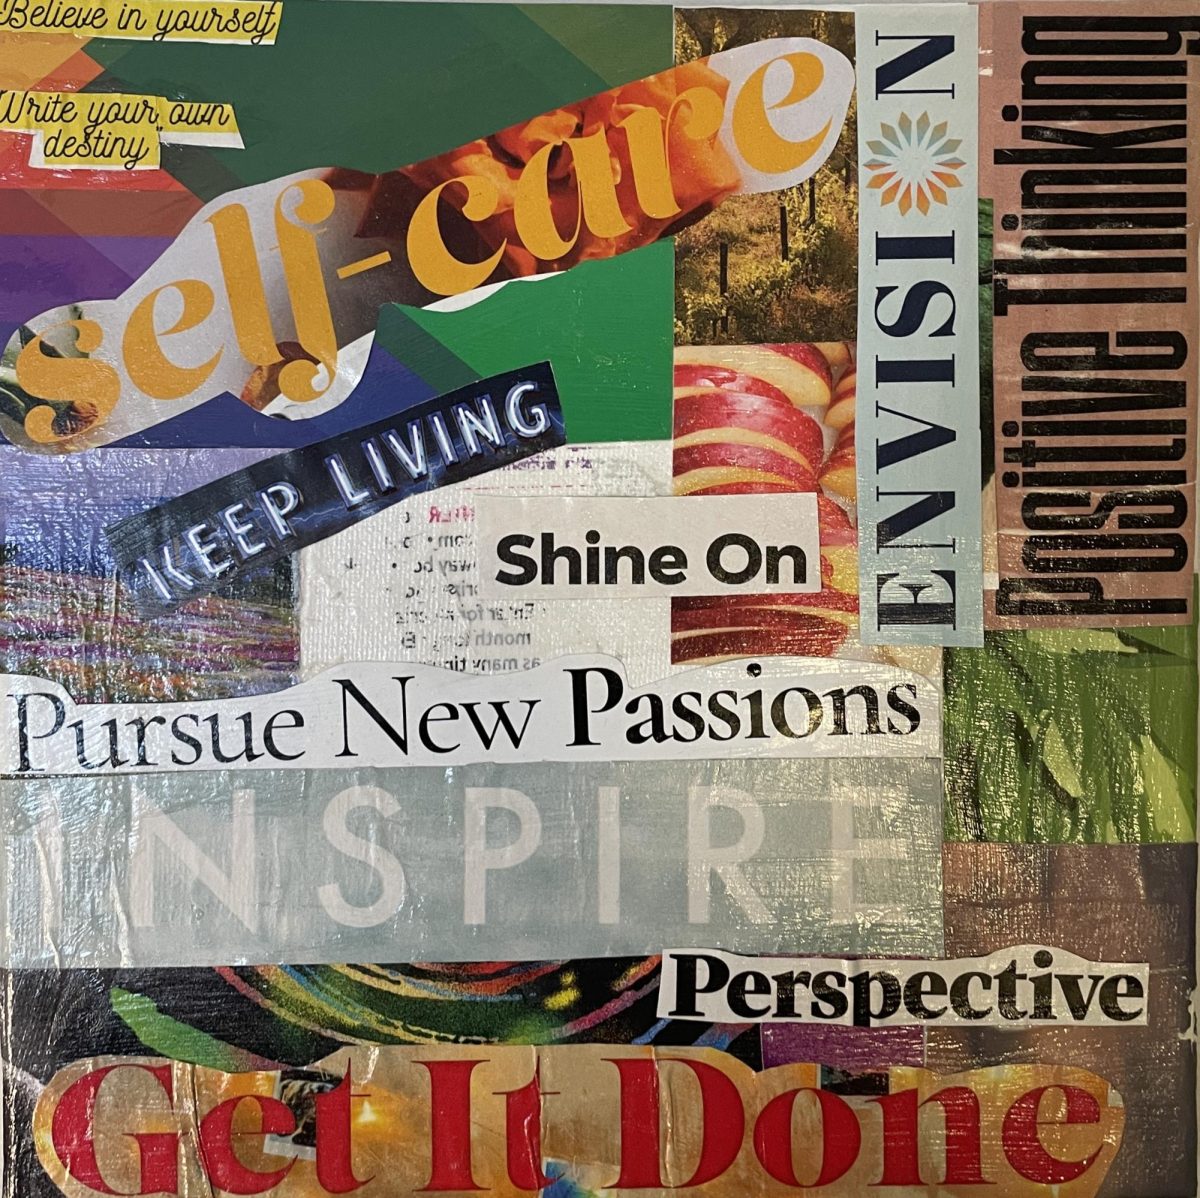 An example of a vision board.